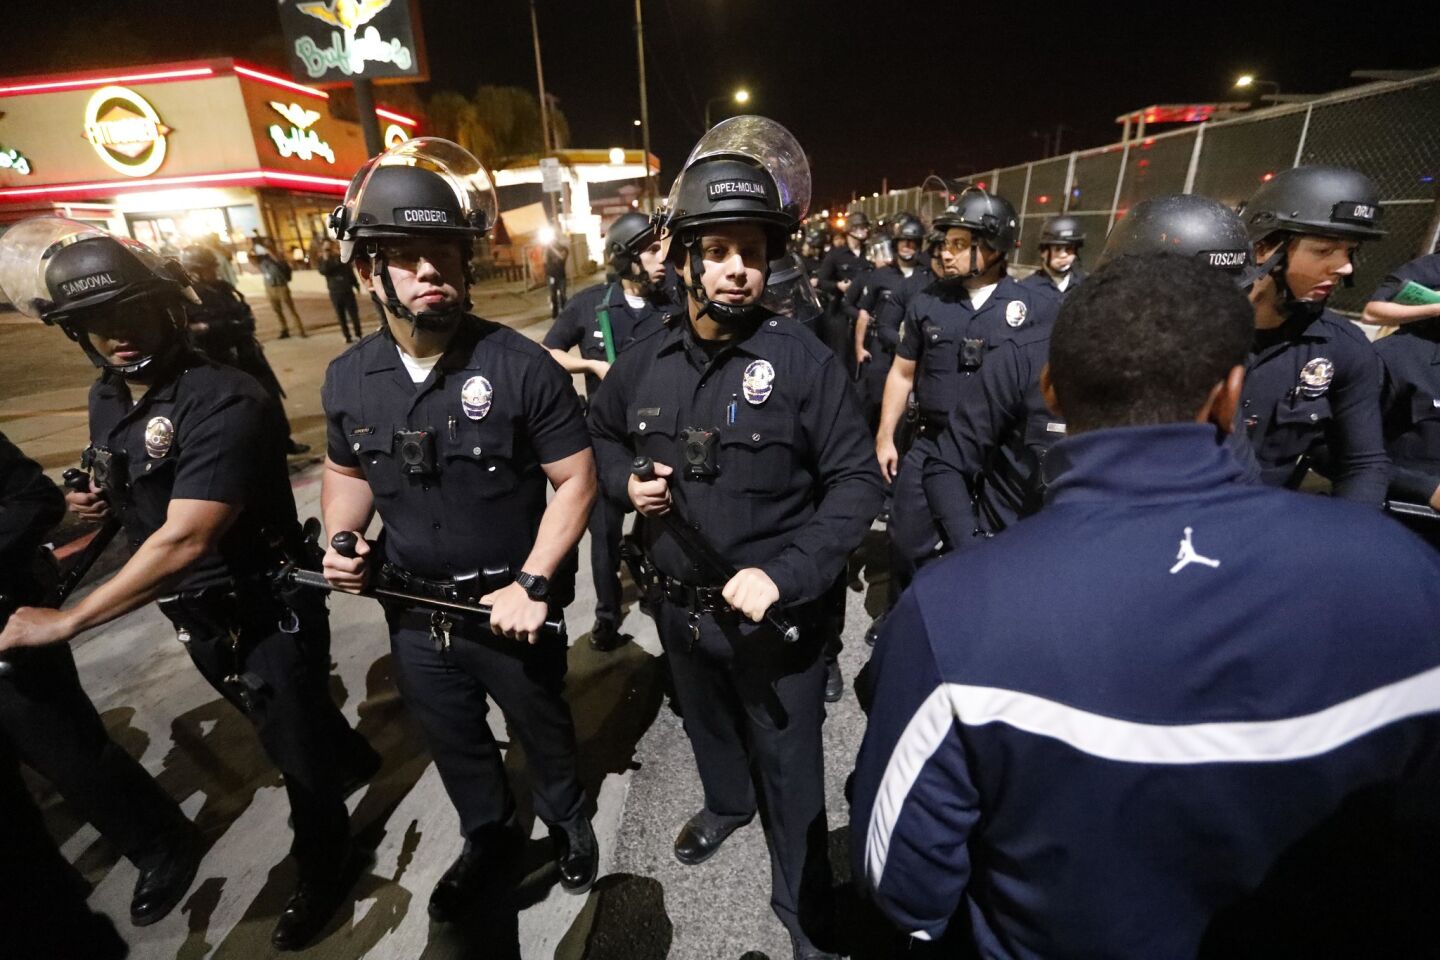 L.A. police push back a crowd along Crenshaw Boulevard after a stamped erupted, injuring several people, during a vigil Monday for slain rapper Nipsey Hussle.